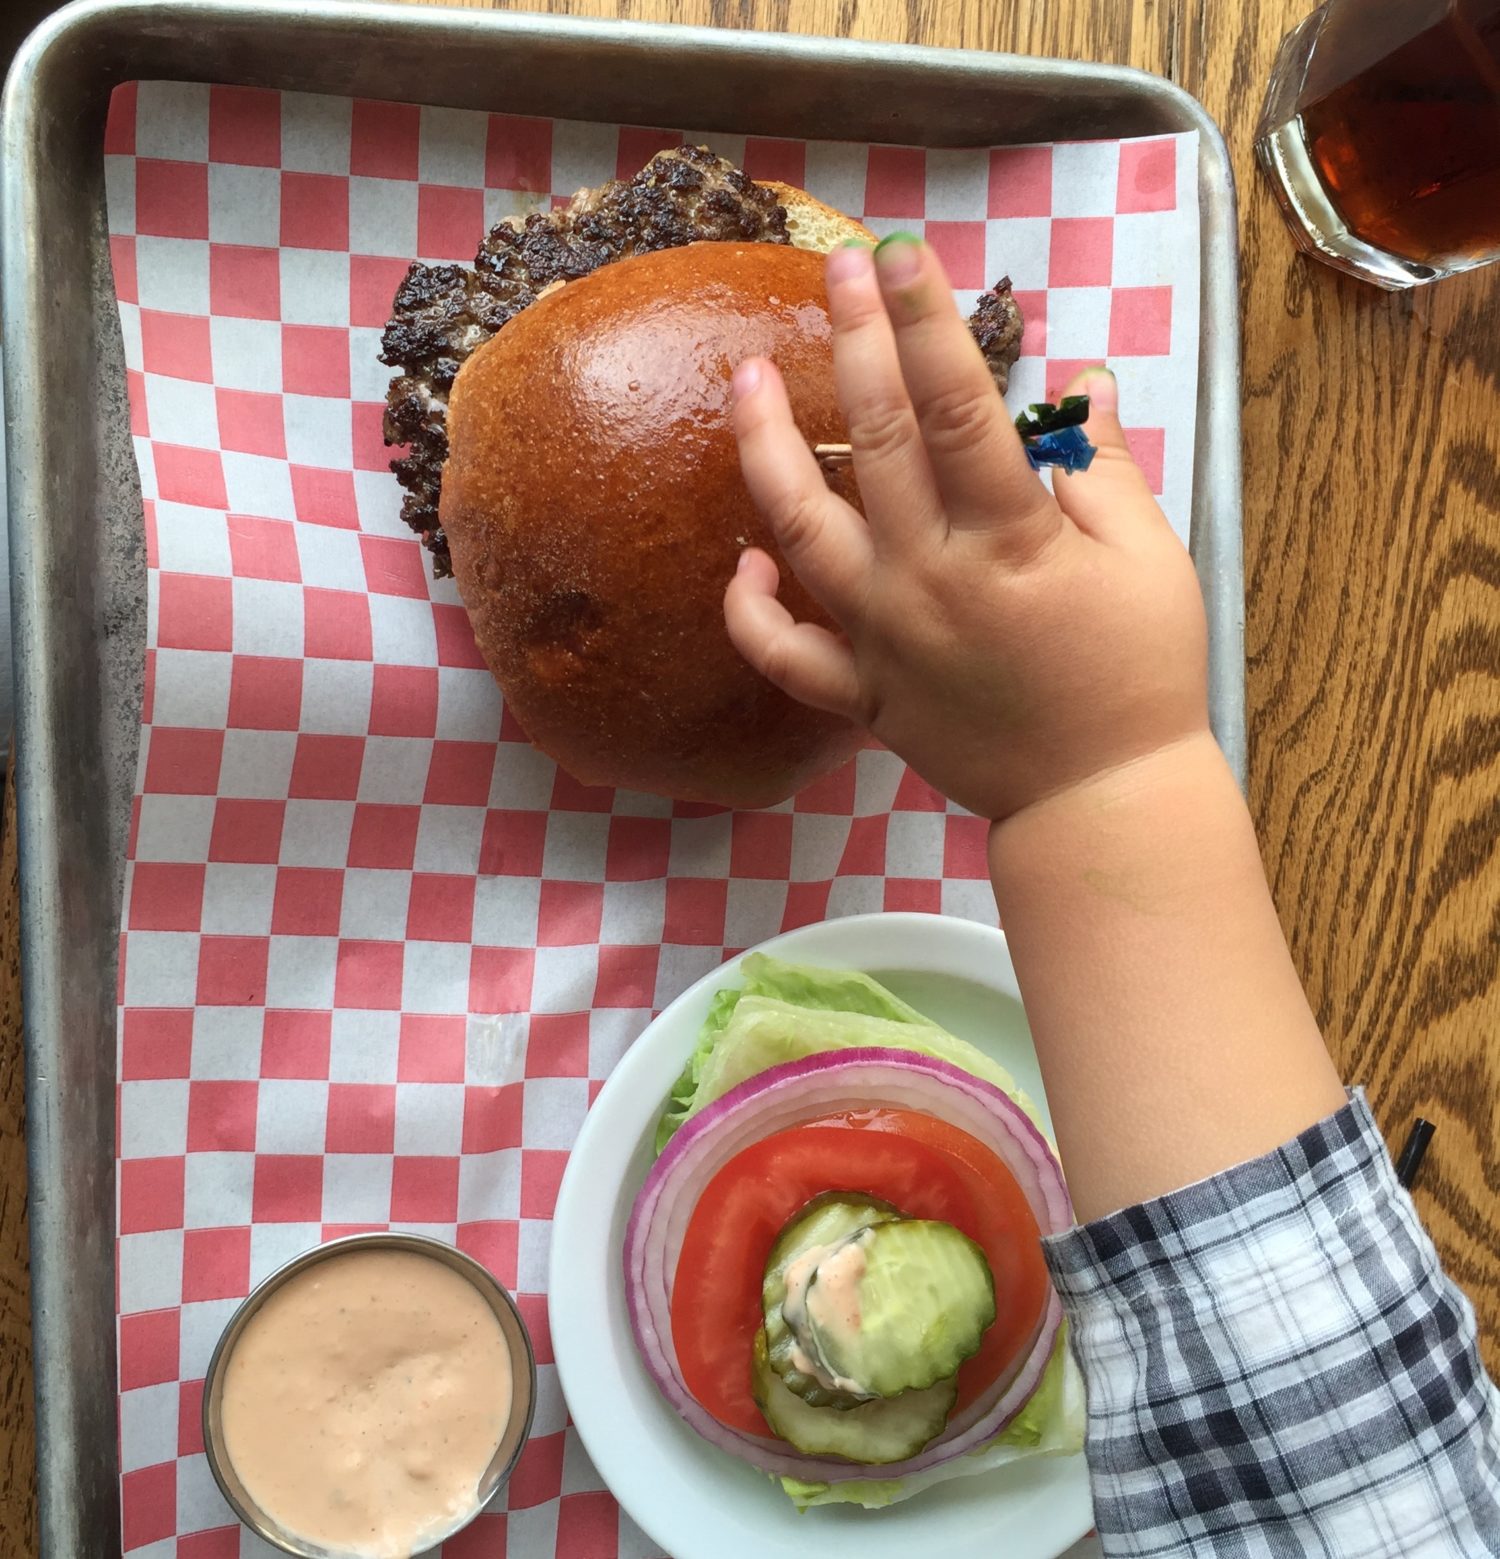 A child reaching for a burger on a tray.